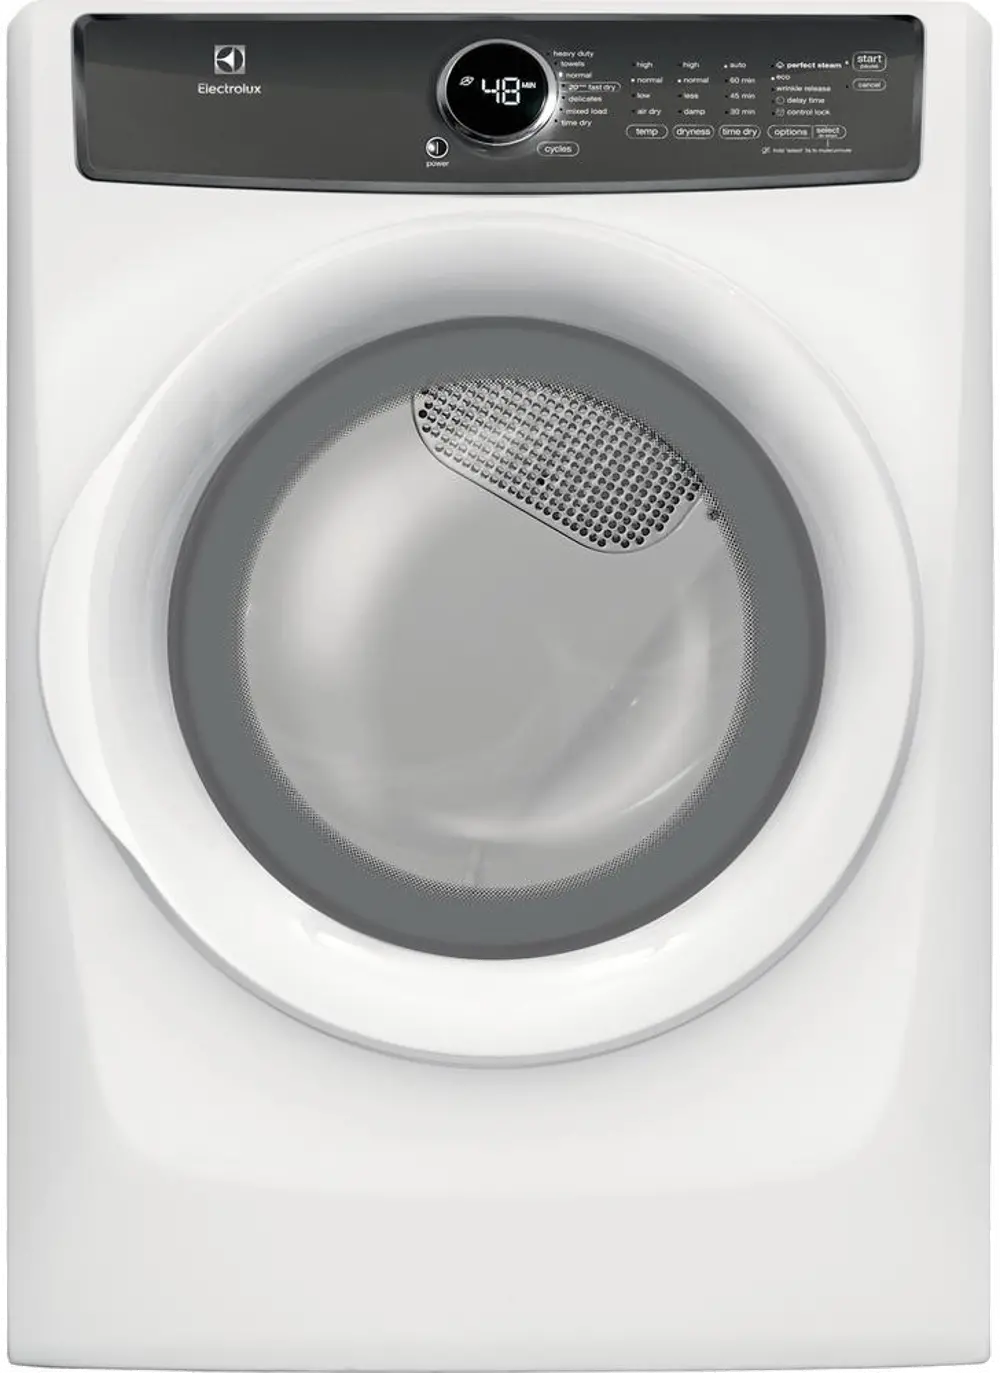 EFMG427UIW Electrolux Perfect Steam Gas Dryer - 8.0 cu. ft. White-1